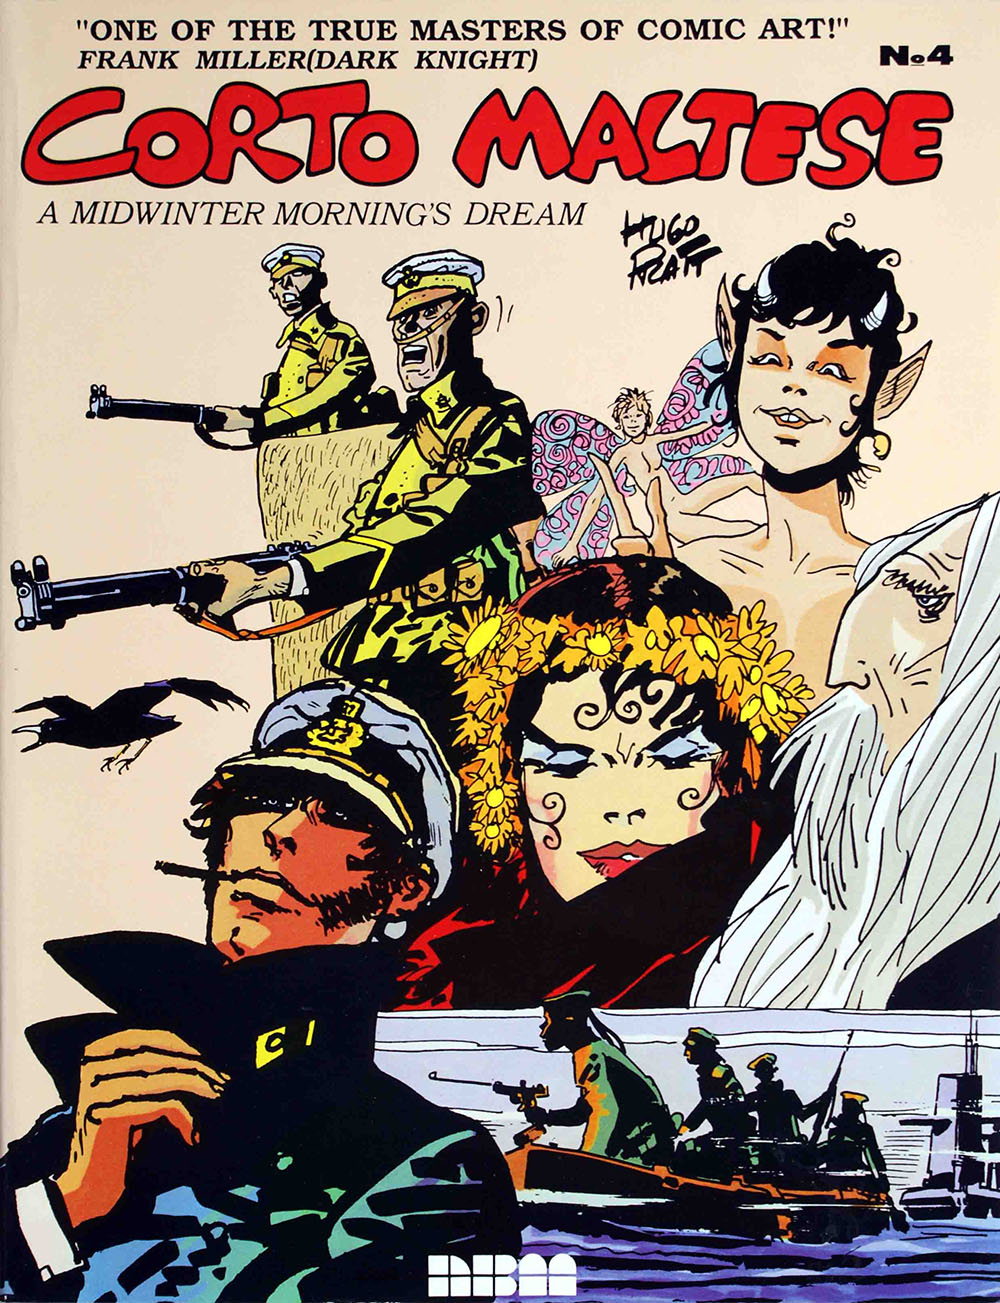 Corto Maltese vol. 4 A Midwinter Morning's Dream at The Book Palace